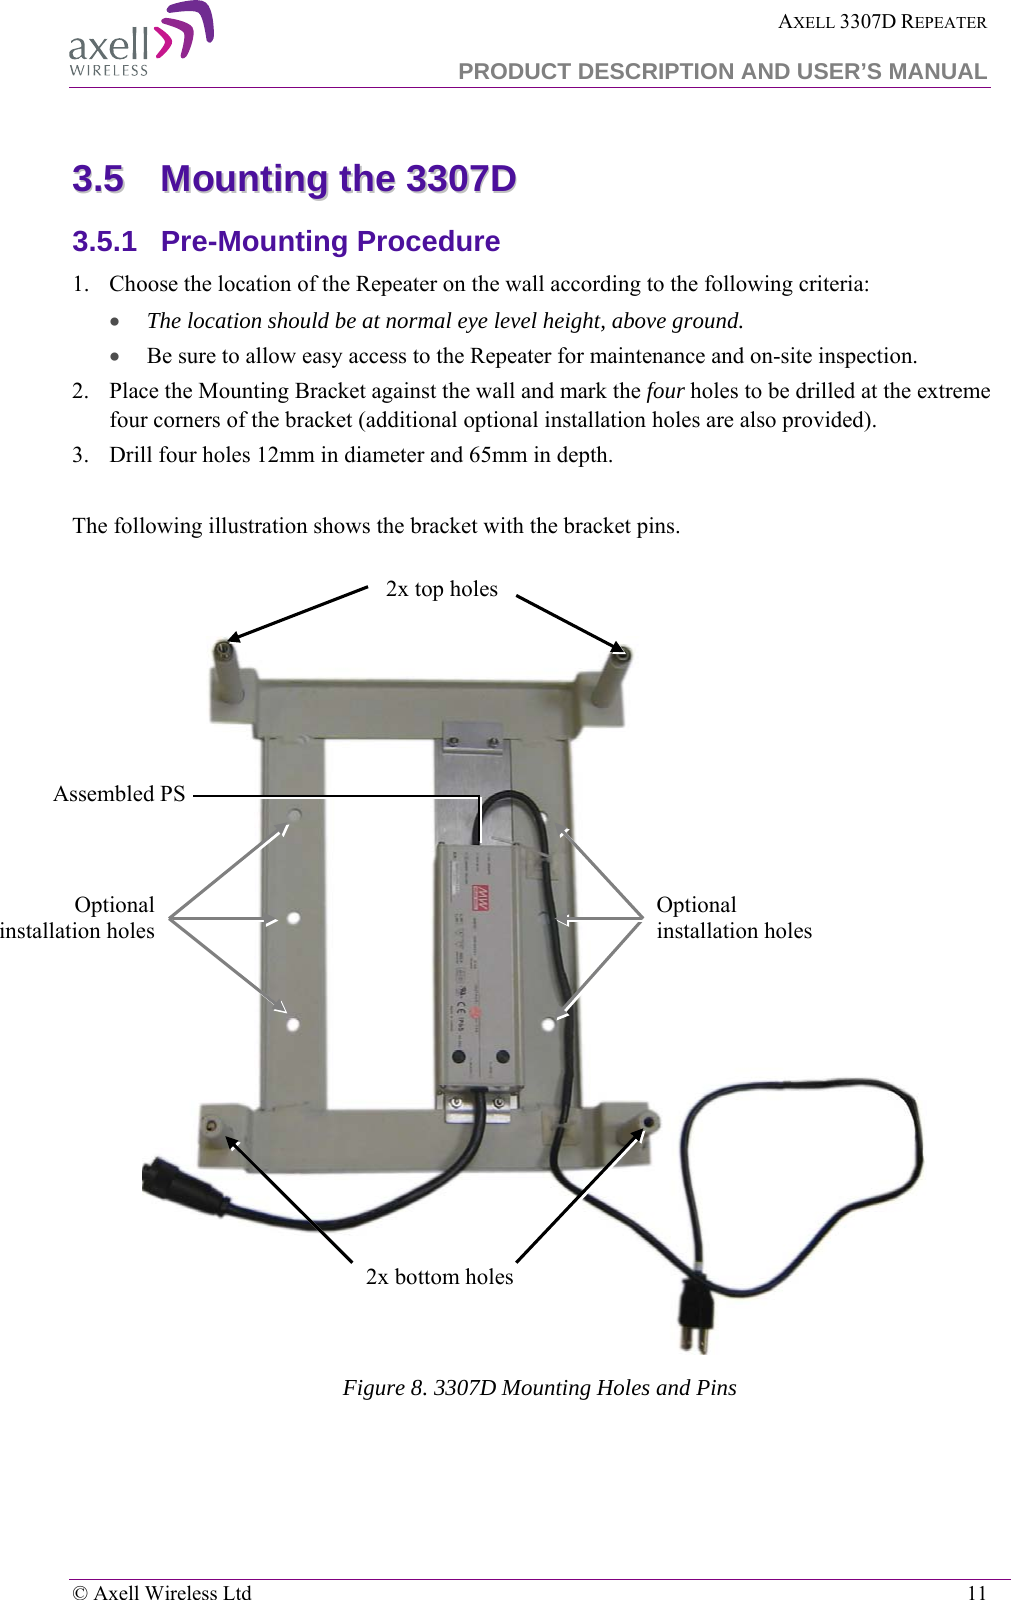  AXELL 3307D REPEATER  PRODUCT DESCRIPTION AND USER’S MANUAL   © Axell Wireless Ltd    11 33..55  MMoouunnttiinngg  tthhee  33330077DD    3.5.1  Pre-Mounting Procedure 1.  Choose the location of the Repeater on the wall according to the following criteria: • The location should be at normal eye level height, above ground. • Be sure to allow easy access to the Repeater for maintenance and on-site inspection. 2.  Place the Mounting Bracket against the wall and mark the four holes to be drilled at the extreme four corners of the bracket (additional optional installation holes are also provided). 3.  Drill four holes 12mm in diameter and 65mm in depth.  The following illustration shows the bracket with the bracket pins.    Figure 8. 3307D Mounting Holes and Pins Optional installation holes Optional installation holes 2x bottom holes 2x top holes Assembled PS 